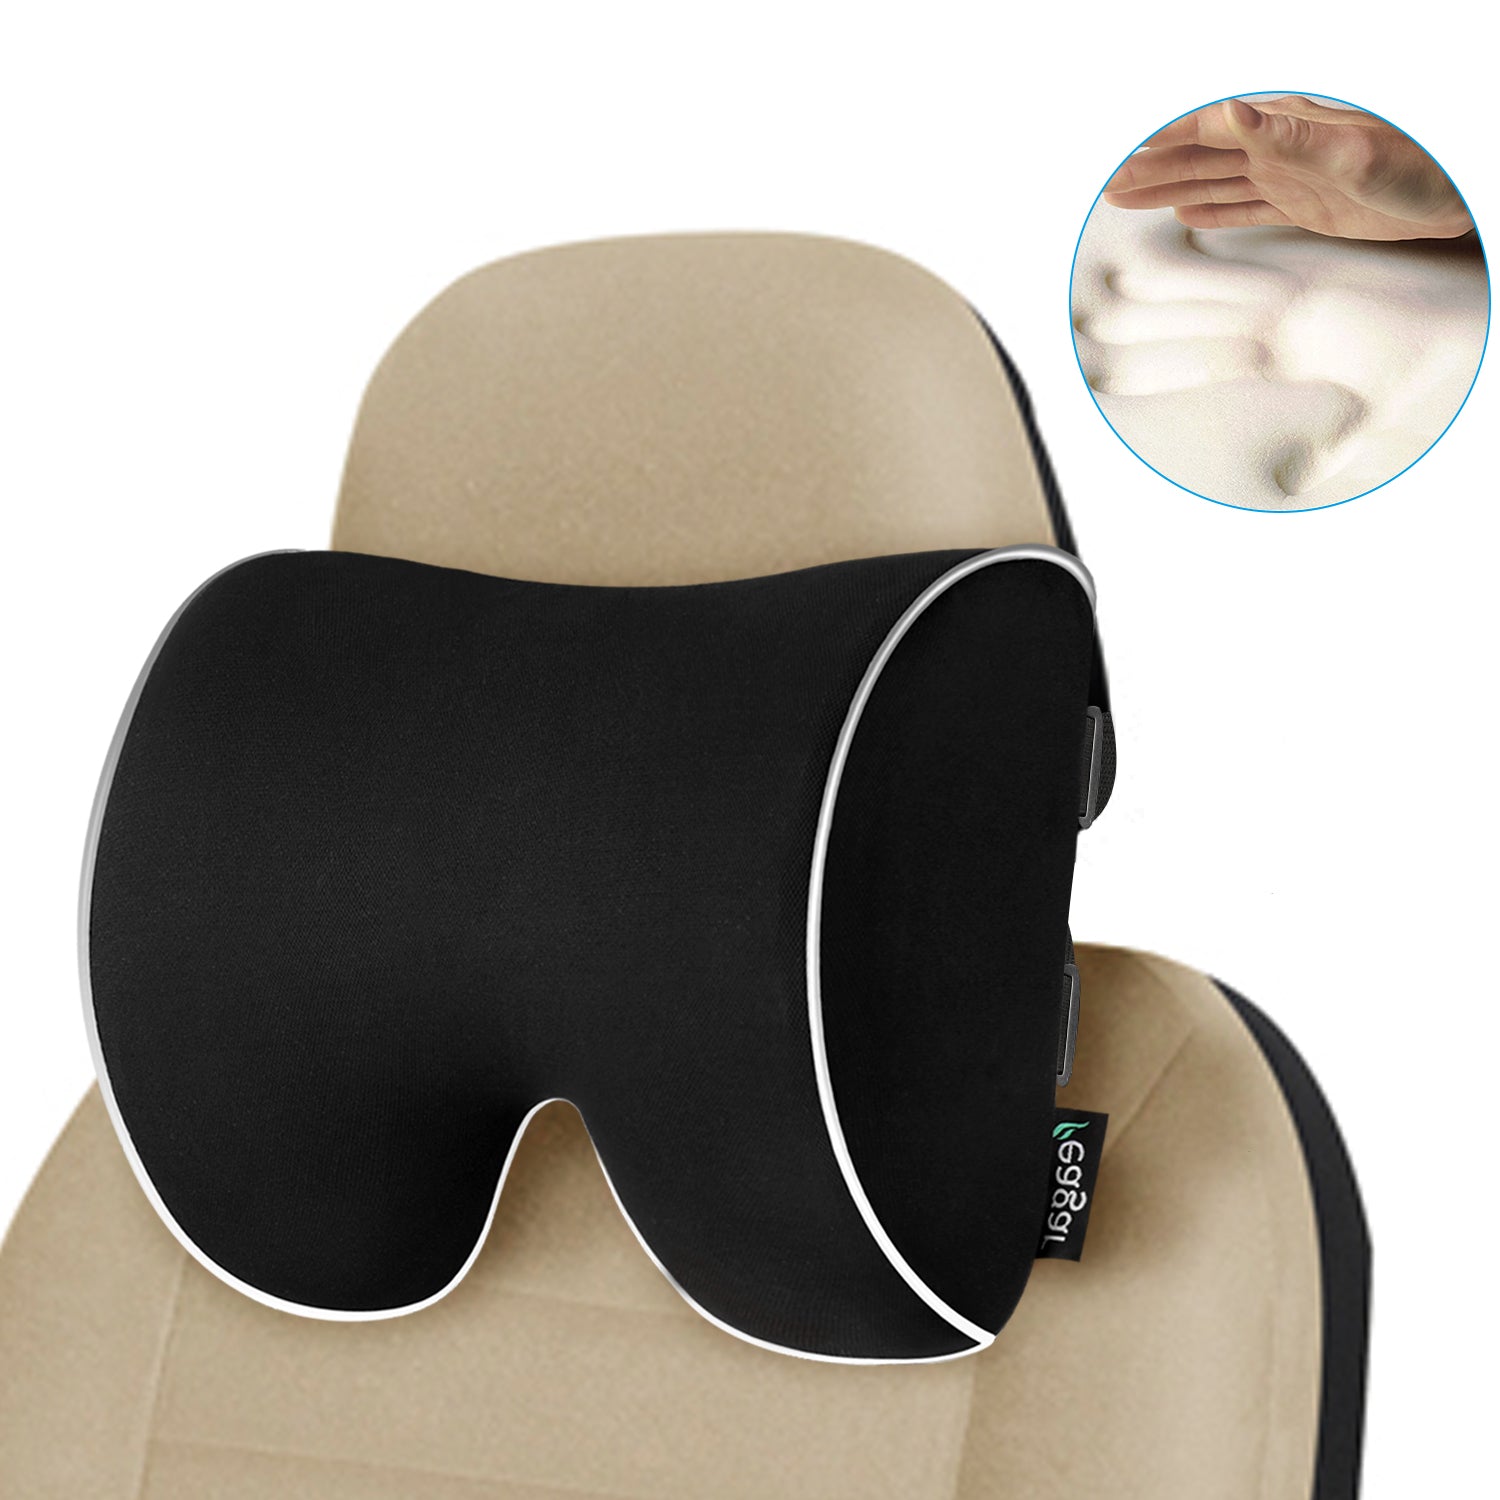 Newgam Car Pillow - Car Neck Pillow for Neck Pain Relief and Cervical  Support,Car Seat Neck Pillow with 100% Pure Memory Foam and Washable  Cover,Car